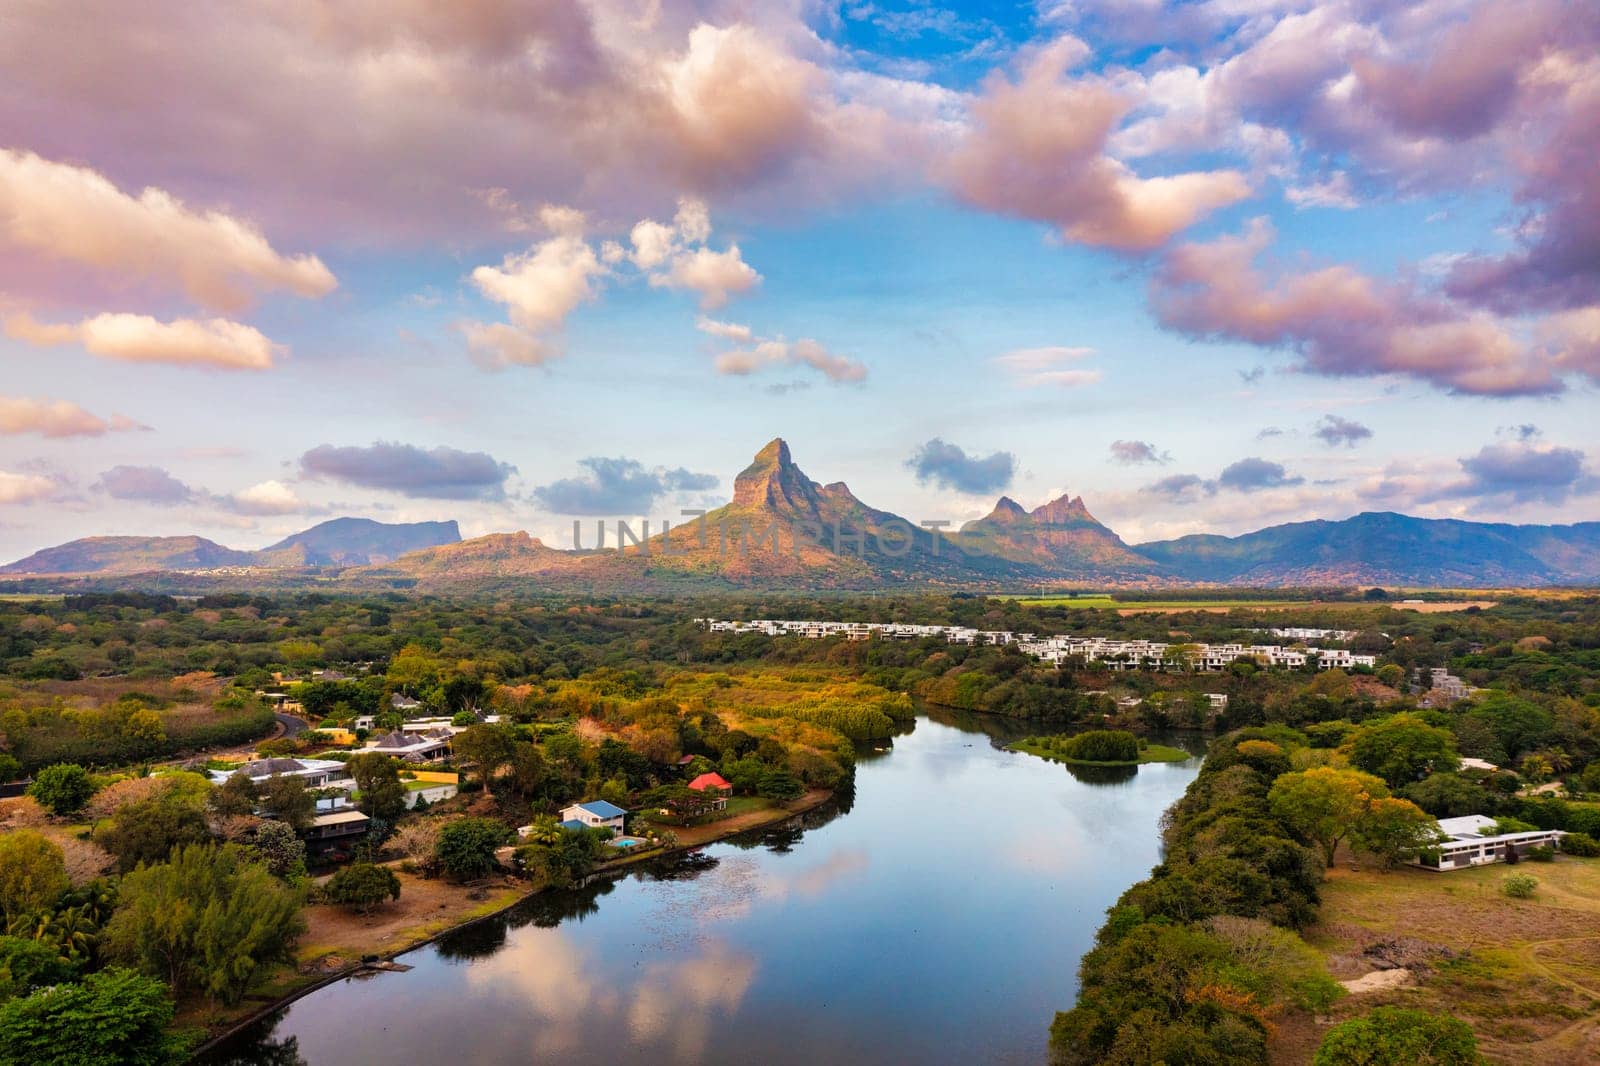 Rempart mountain view from Tamarin bay, Black river, scenic nature of Mauritius island. Beautiful nature and landscapes of Mauritius island. Rempart mountains view from Tamarin bay, Mauritius.